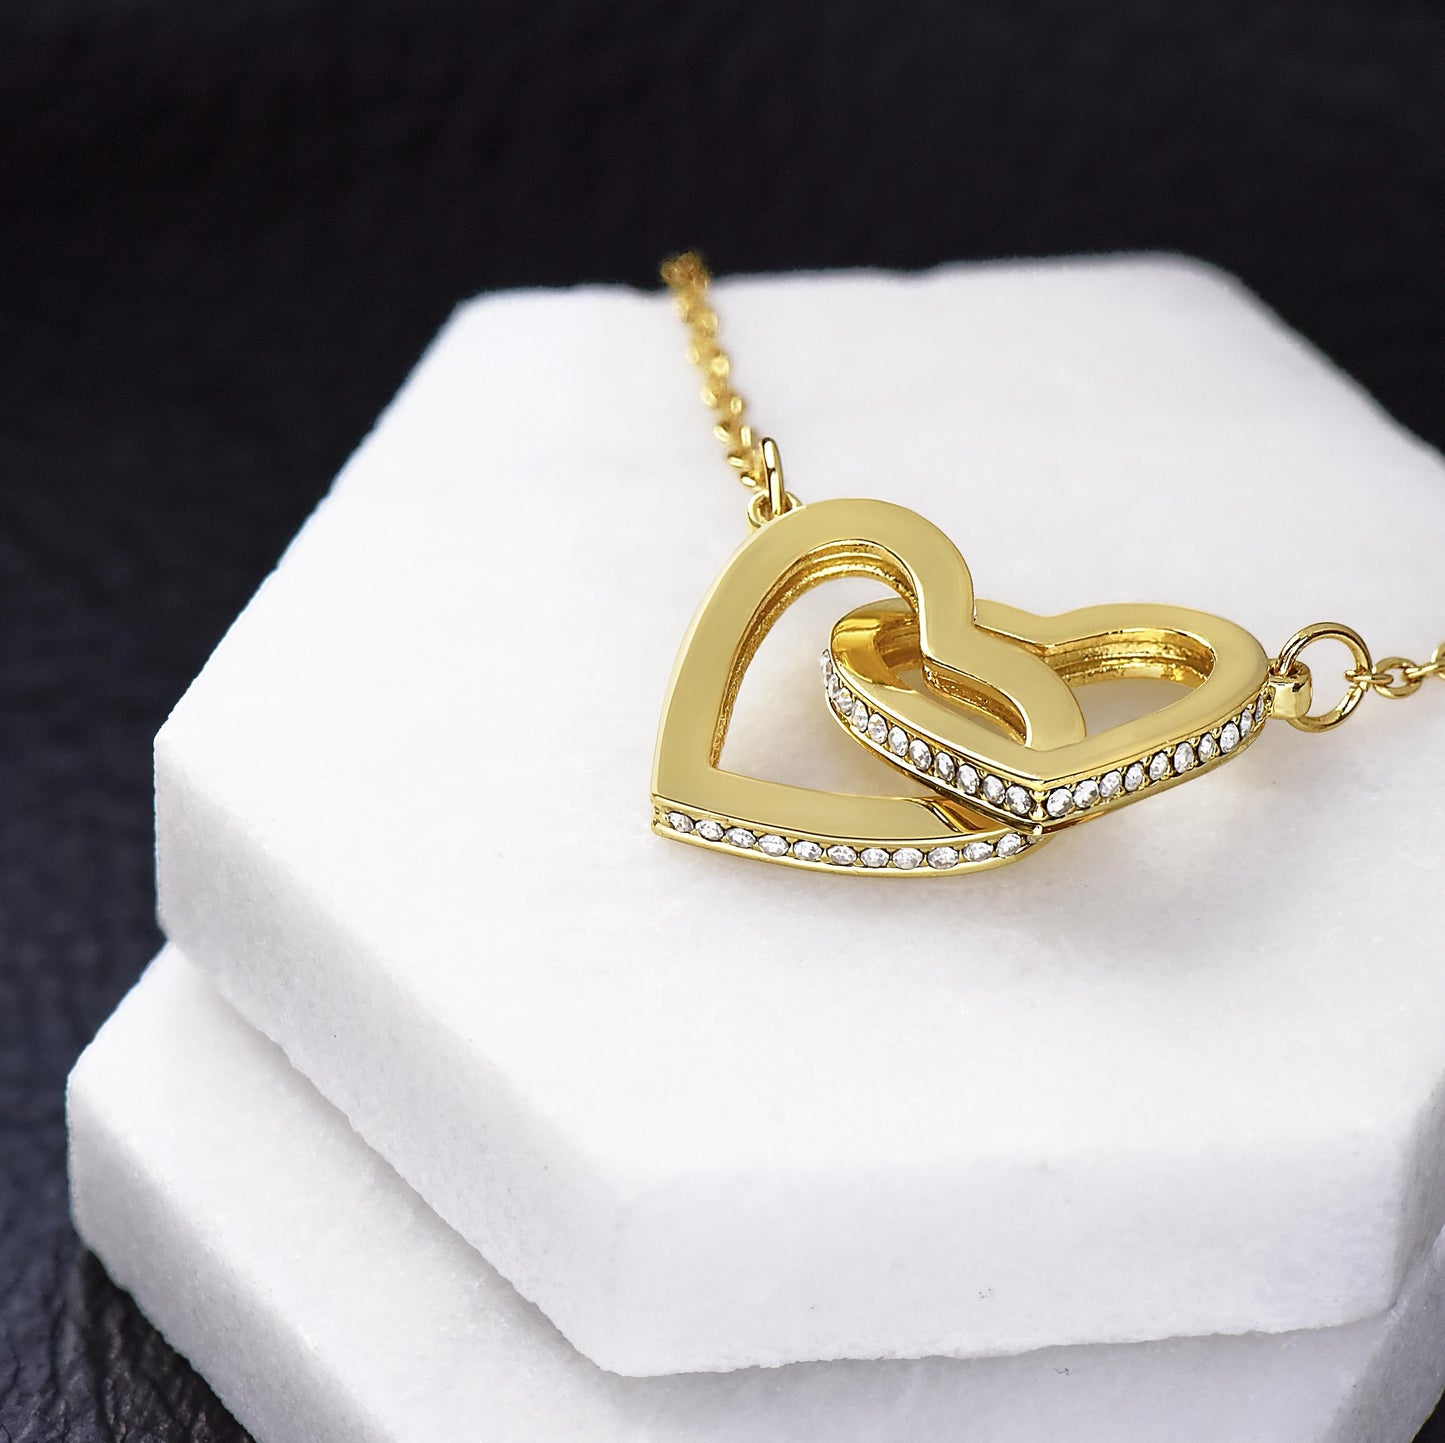 Girlfriend Necklace, Gift Necklace With Message Card To Girlfriend Swiped Right